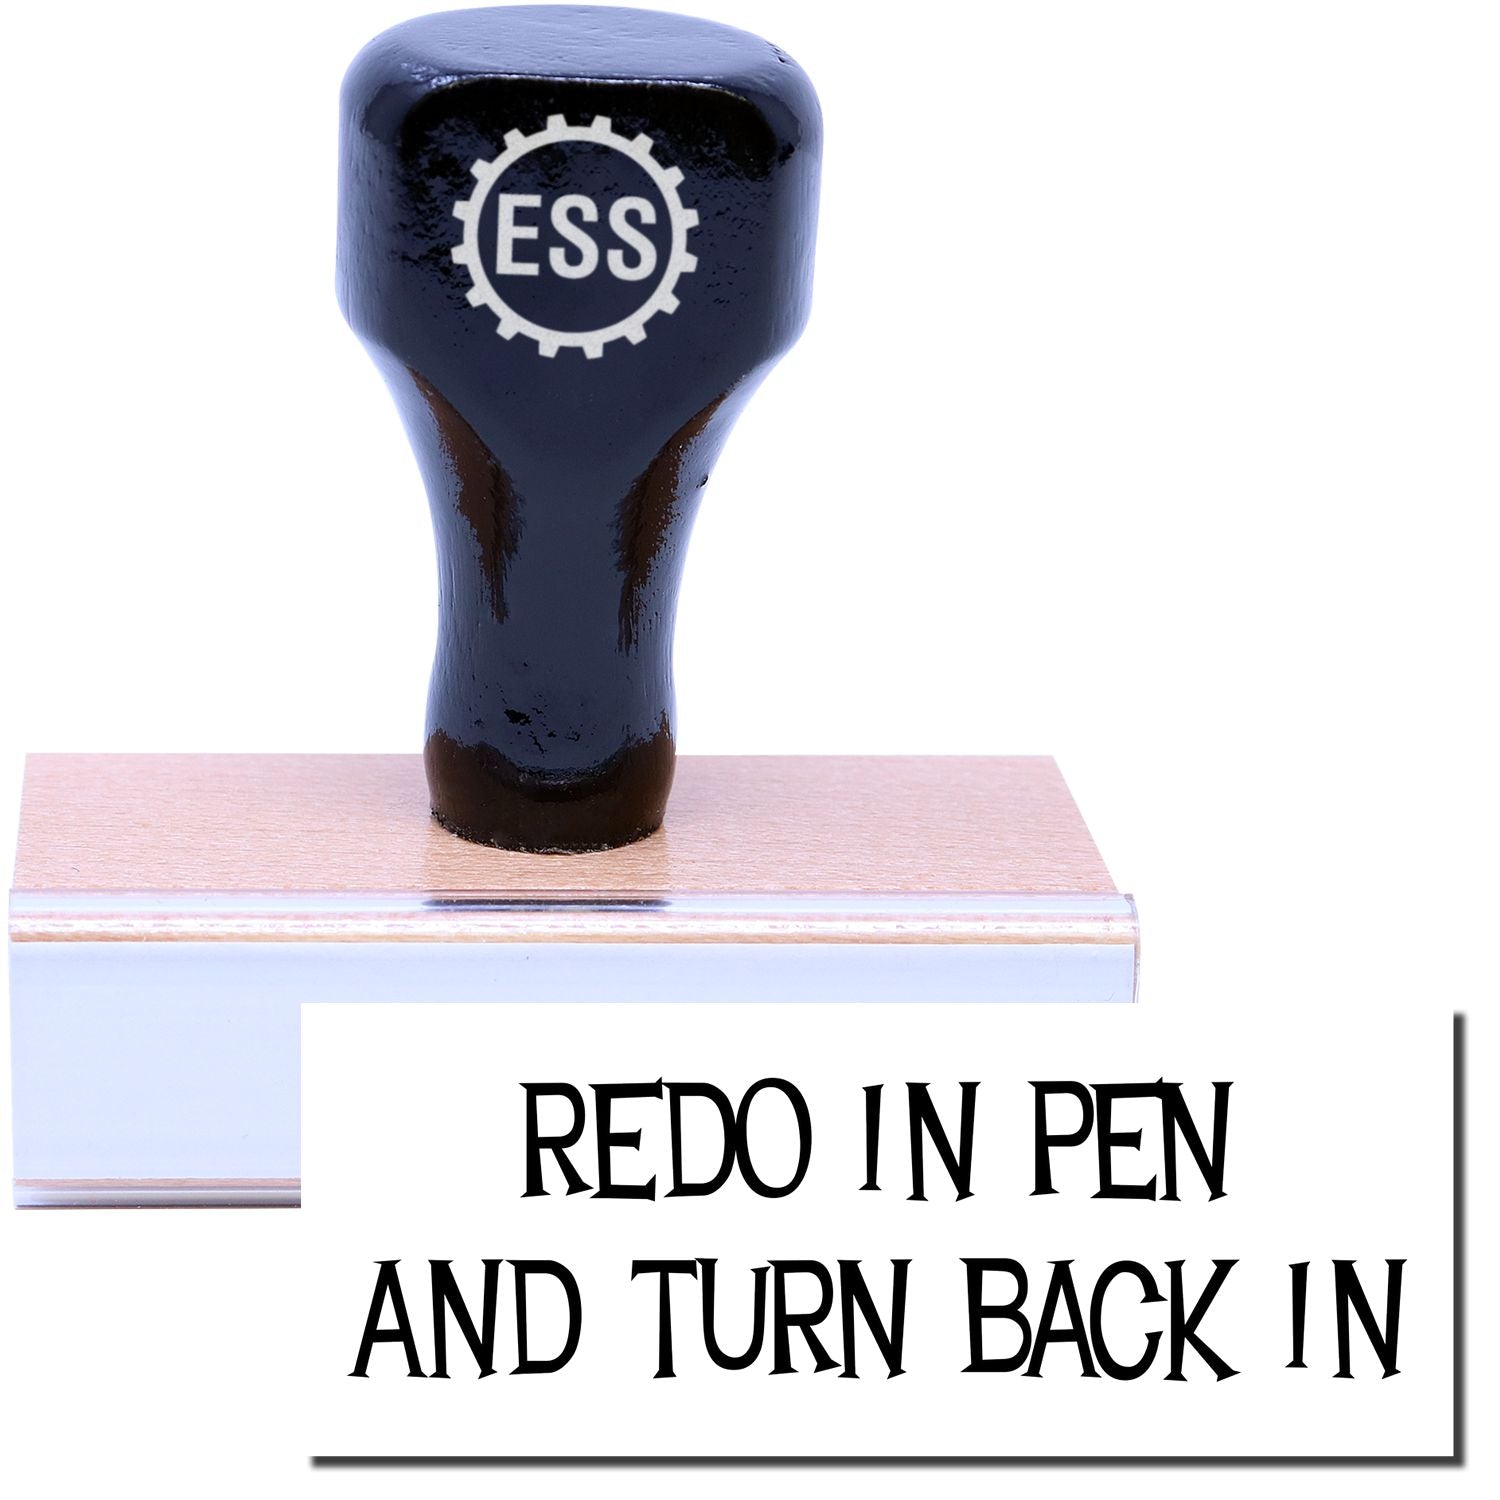 A stock office rubber stamp with a stamped image showing how the text "REDO IN PEN AND TURN BACK IN" in a large font is displayed after stamping.